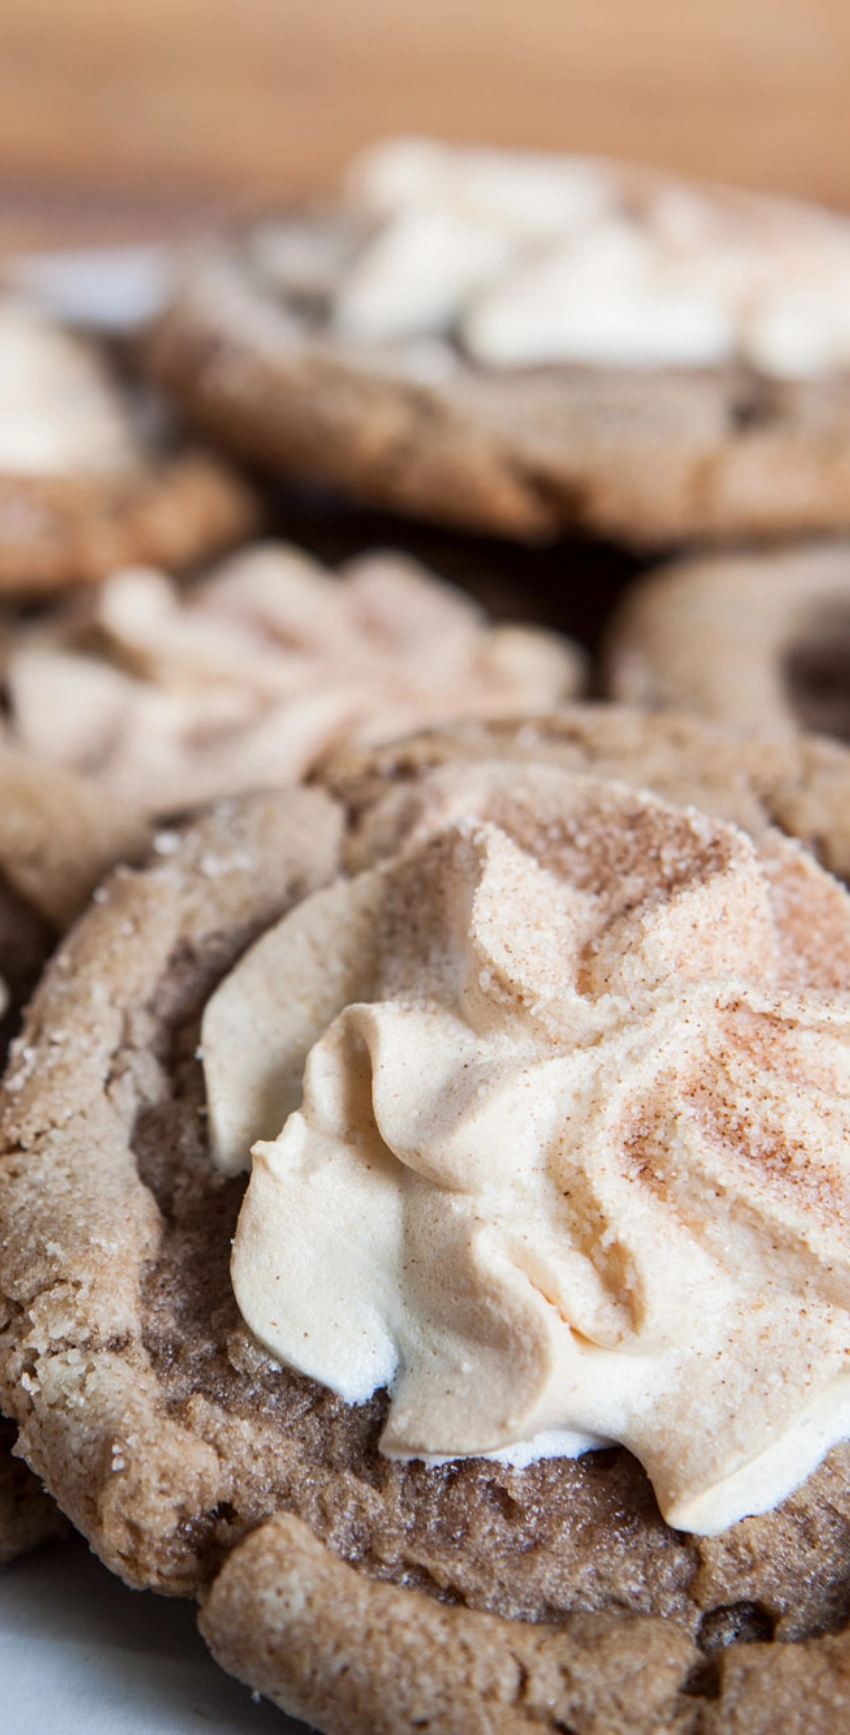 Close-up of baked cookies topped with a dollop of whipped cream and a sprinkle of cinnamon.